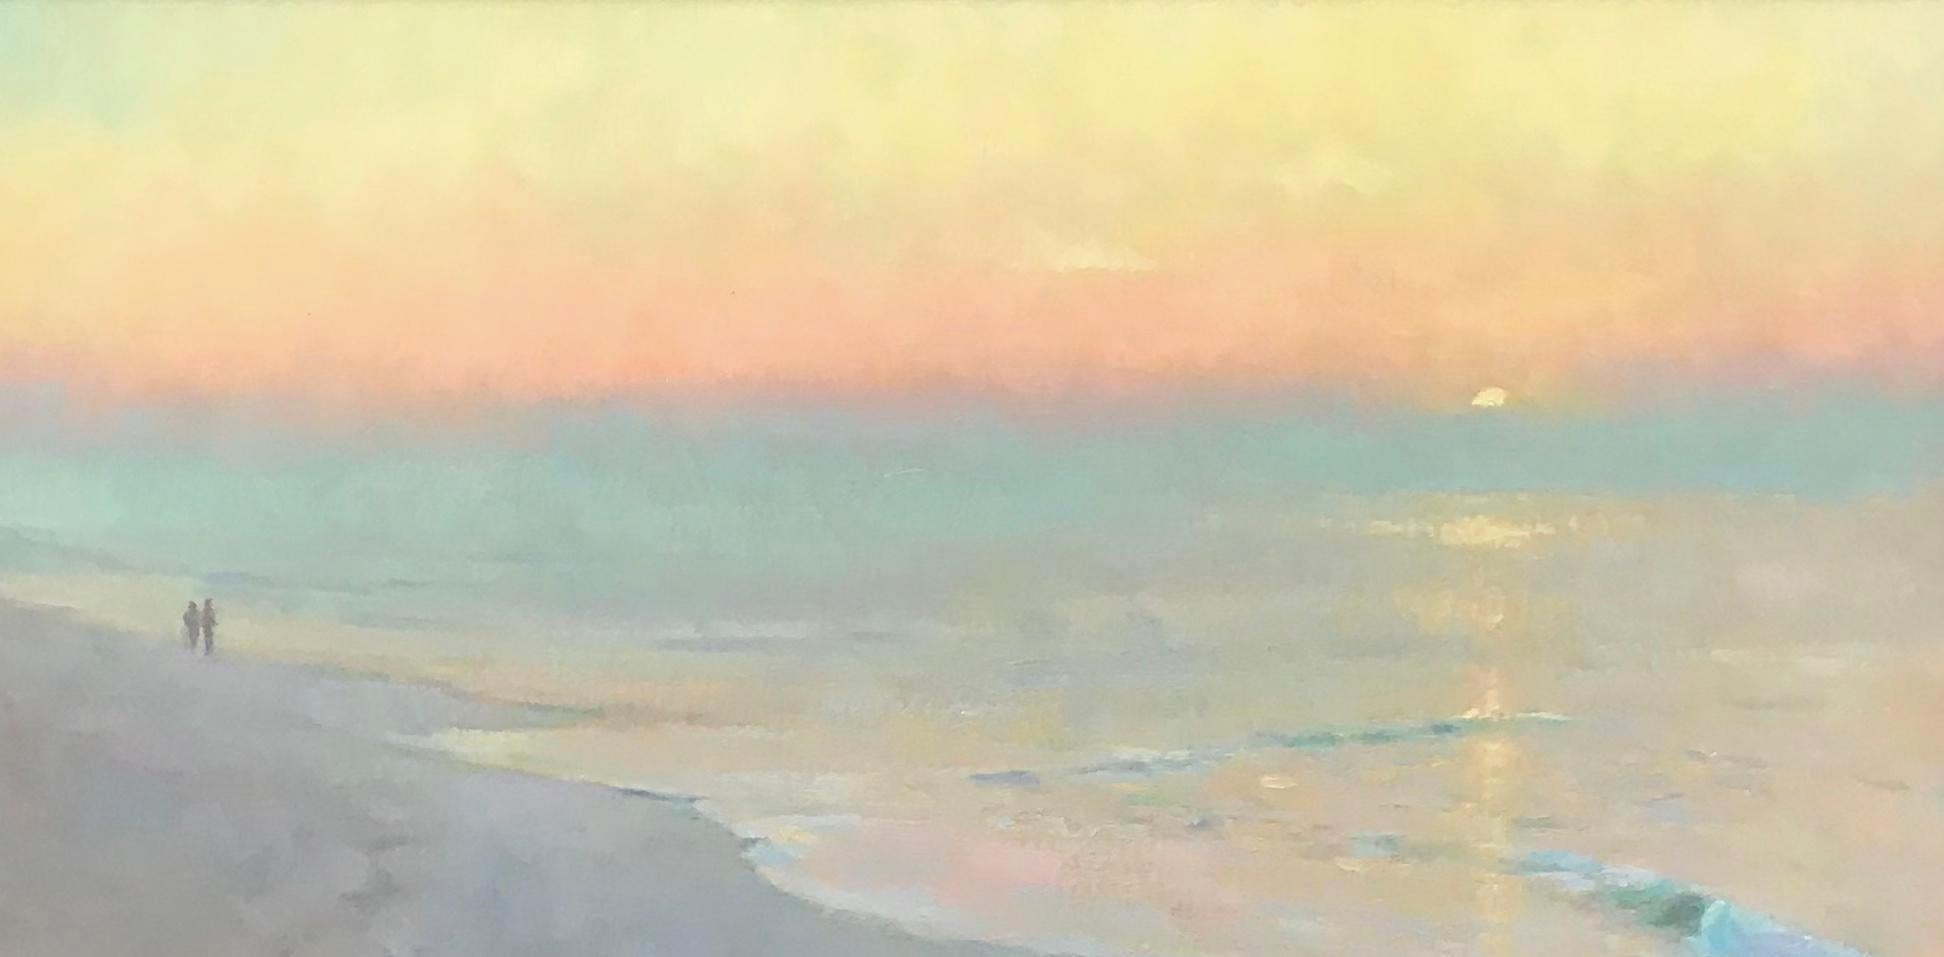  Ocean Beach Seascape Oil Painting Mystical Morning by Michael Budden 2